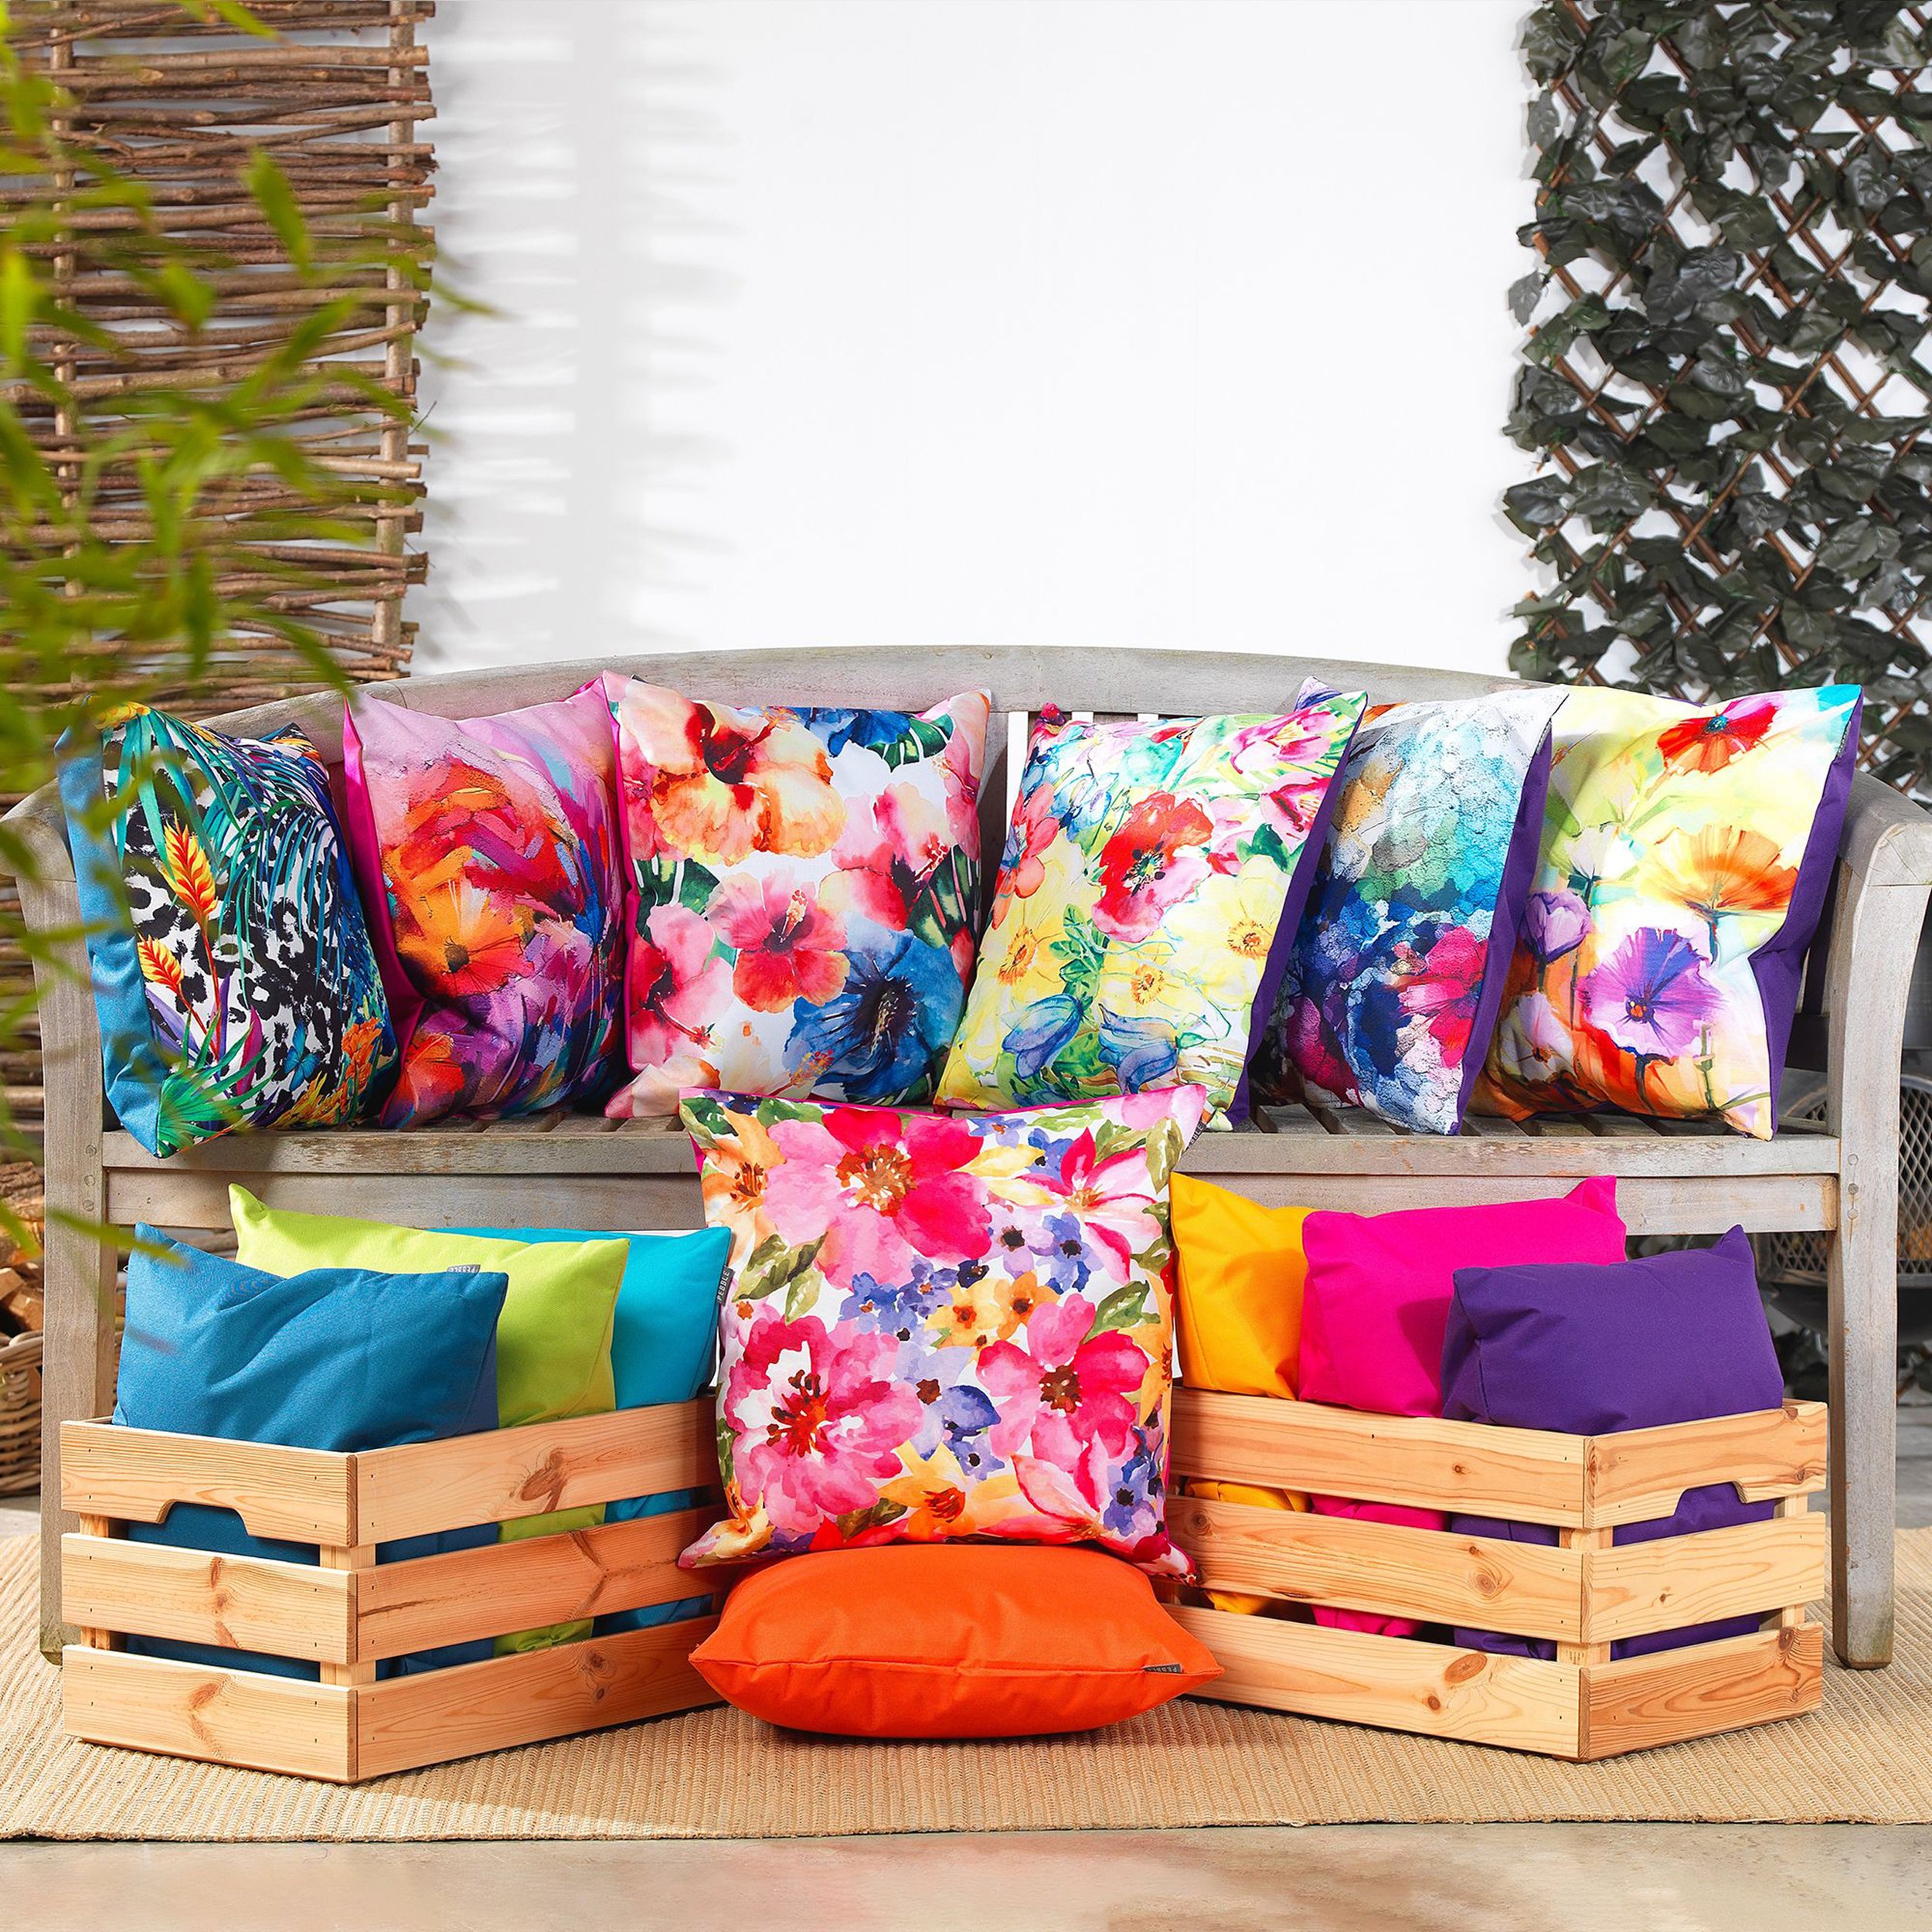 12. Floral Outdoor Cushions from €12.99, 